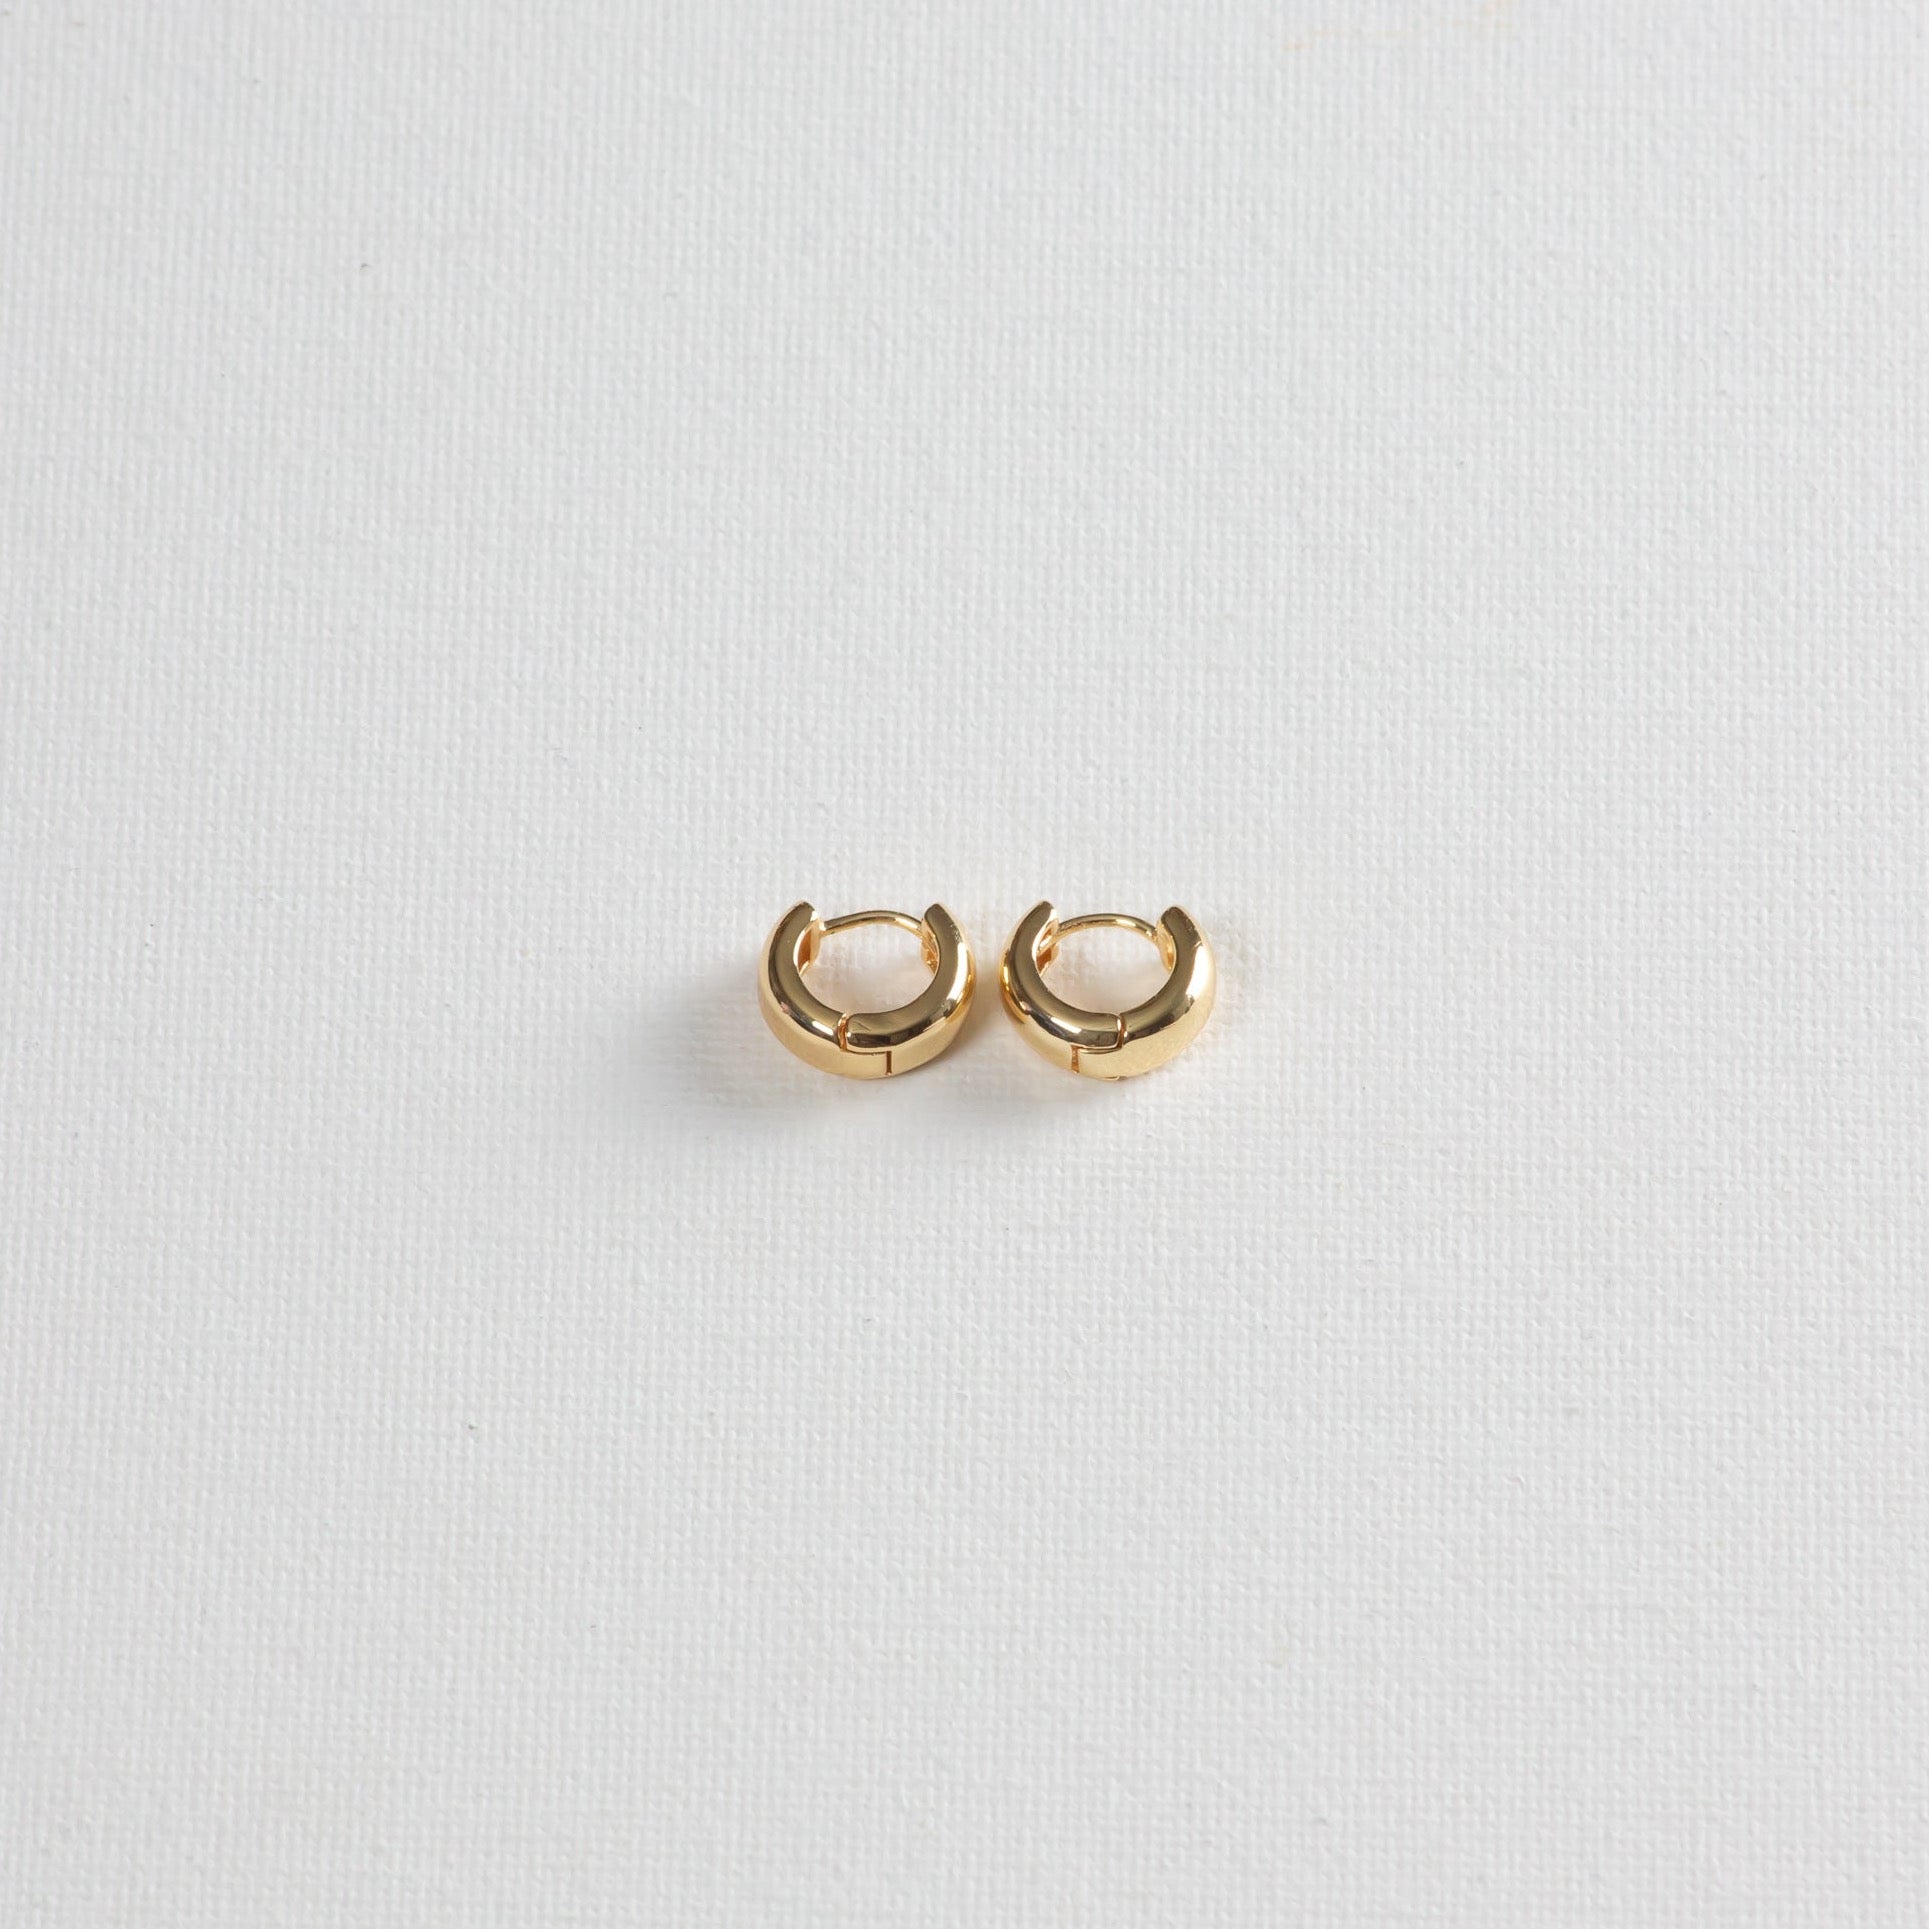 Brie earrings, a small, short, slightly stubby shaped hoops on a white background.